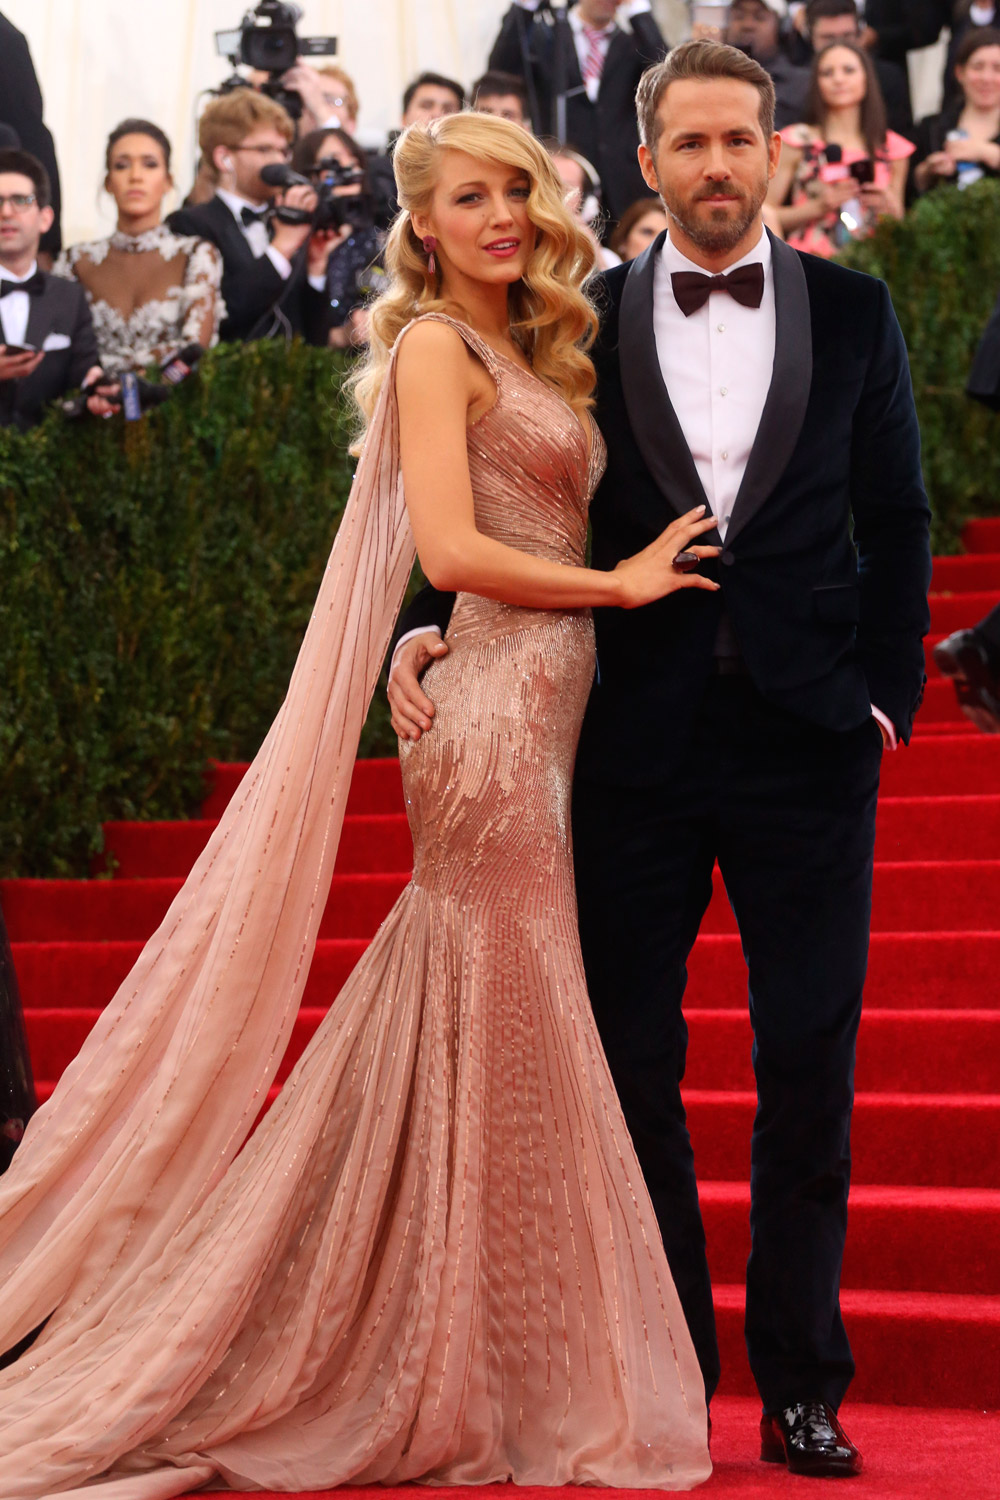 Blake Lively and Ryan Reynolds wearing Gucci at the Met Ball 2014